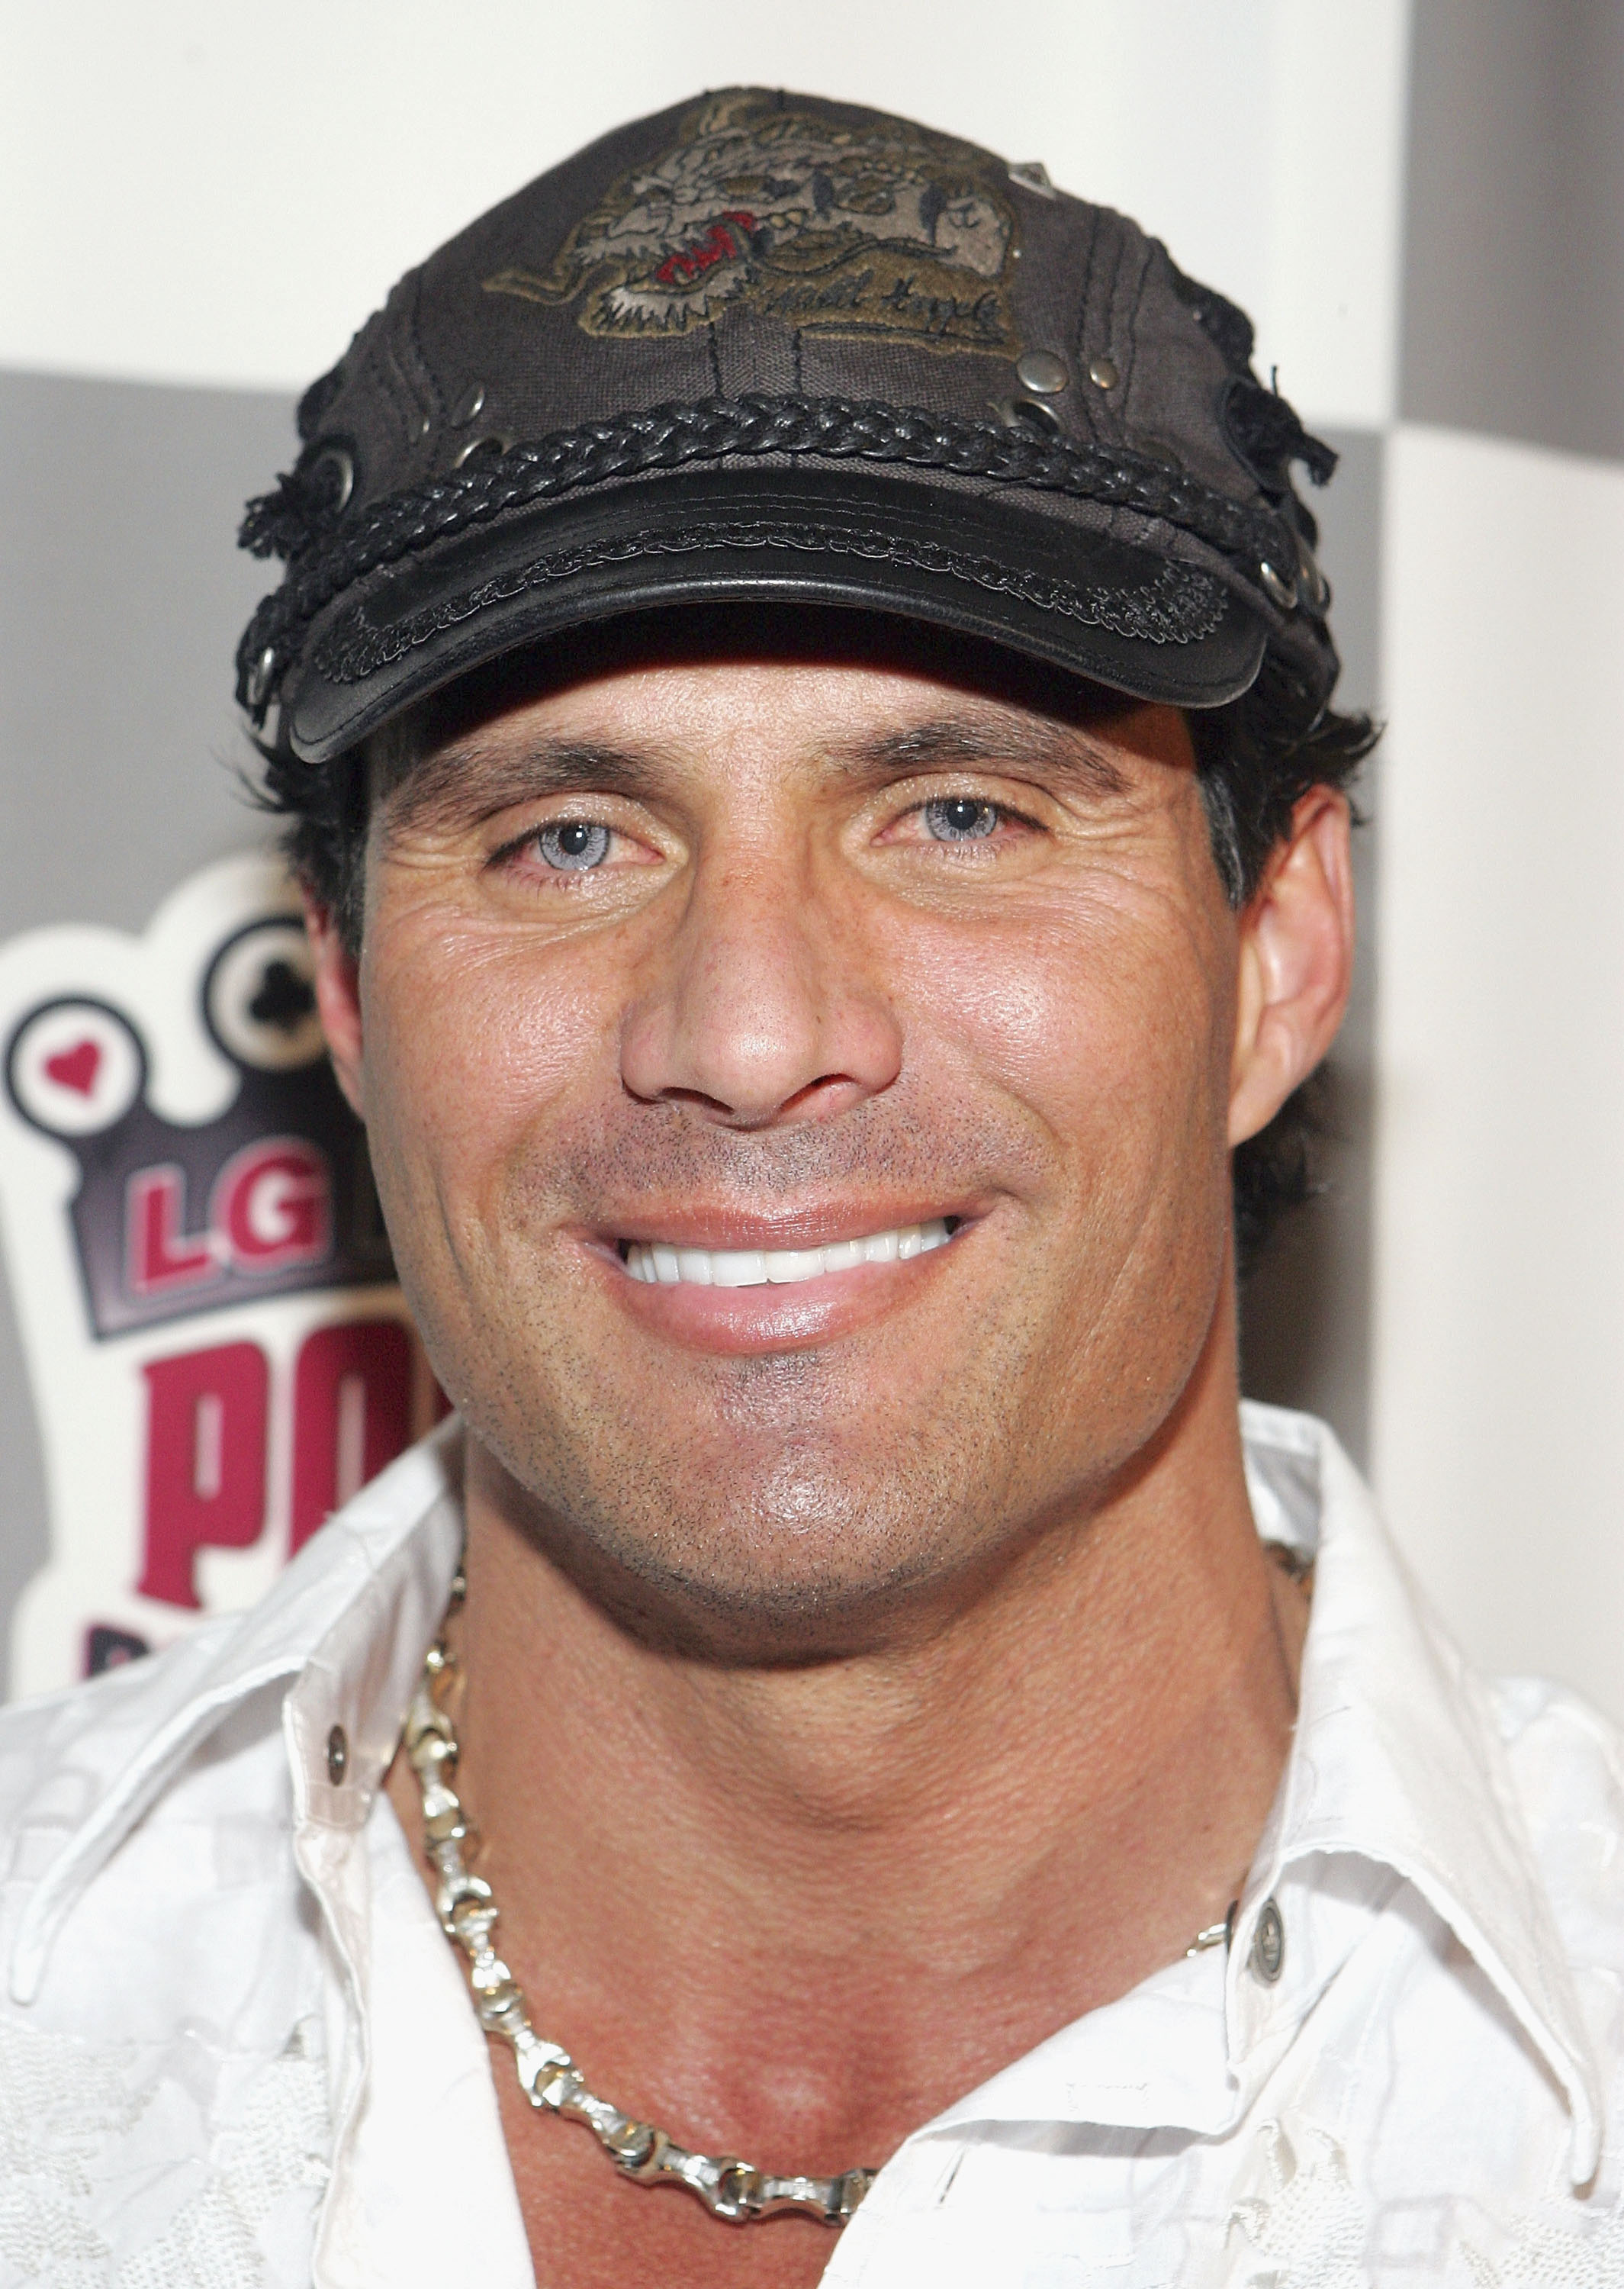 Jose Canseco's 20 Craziest Moments | Bleacher Report | Latest News, Videos and Highlights